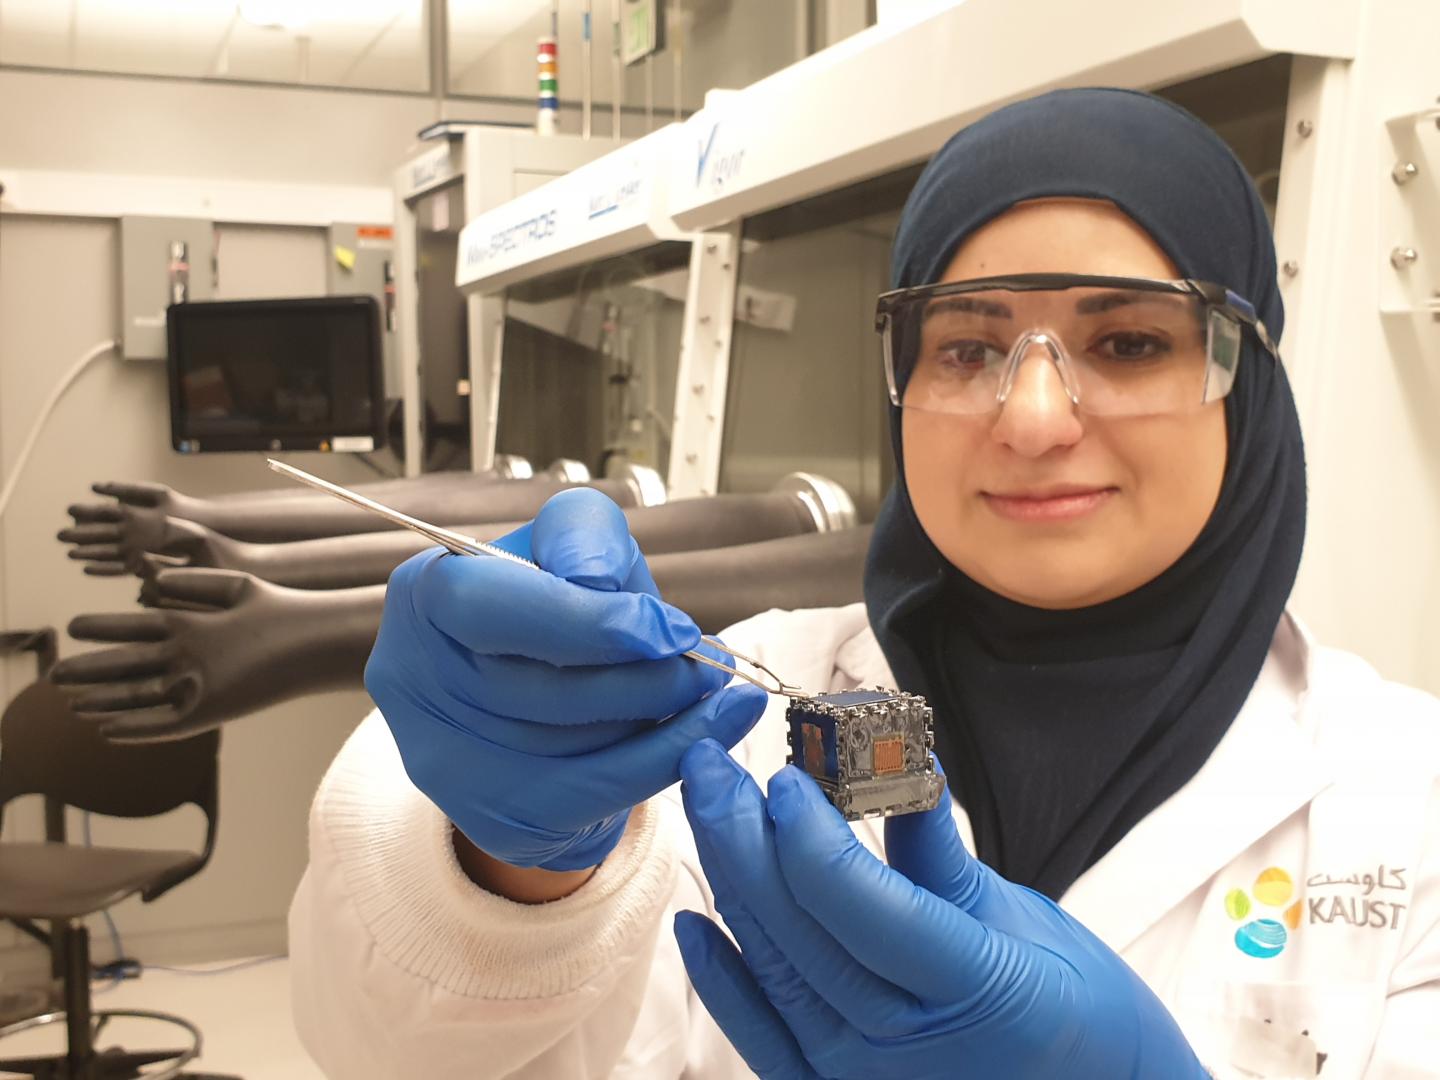 Nazek El-Atab with the team's multisensory system. Source: KAUST